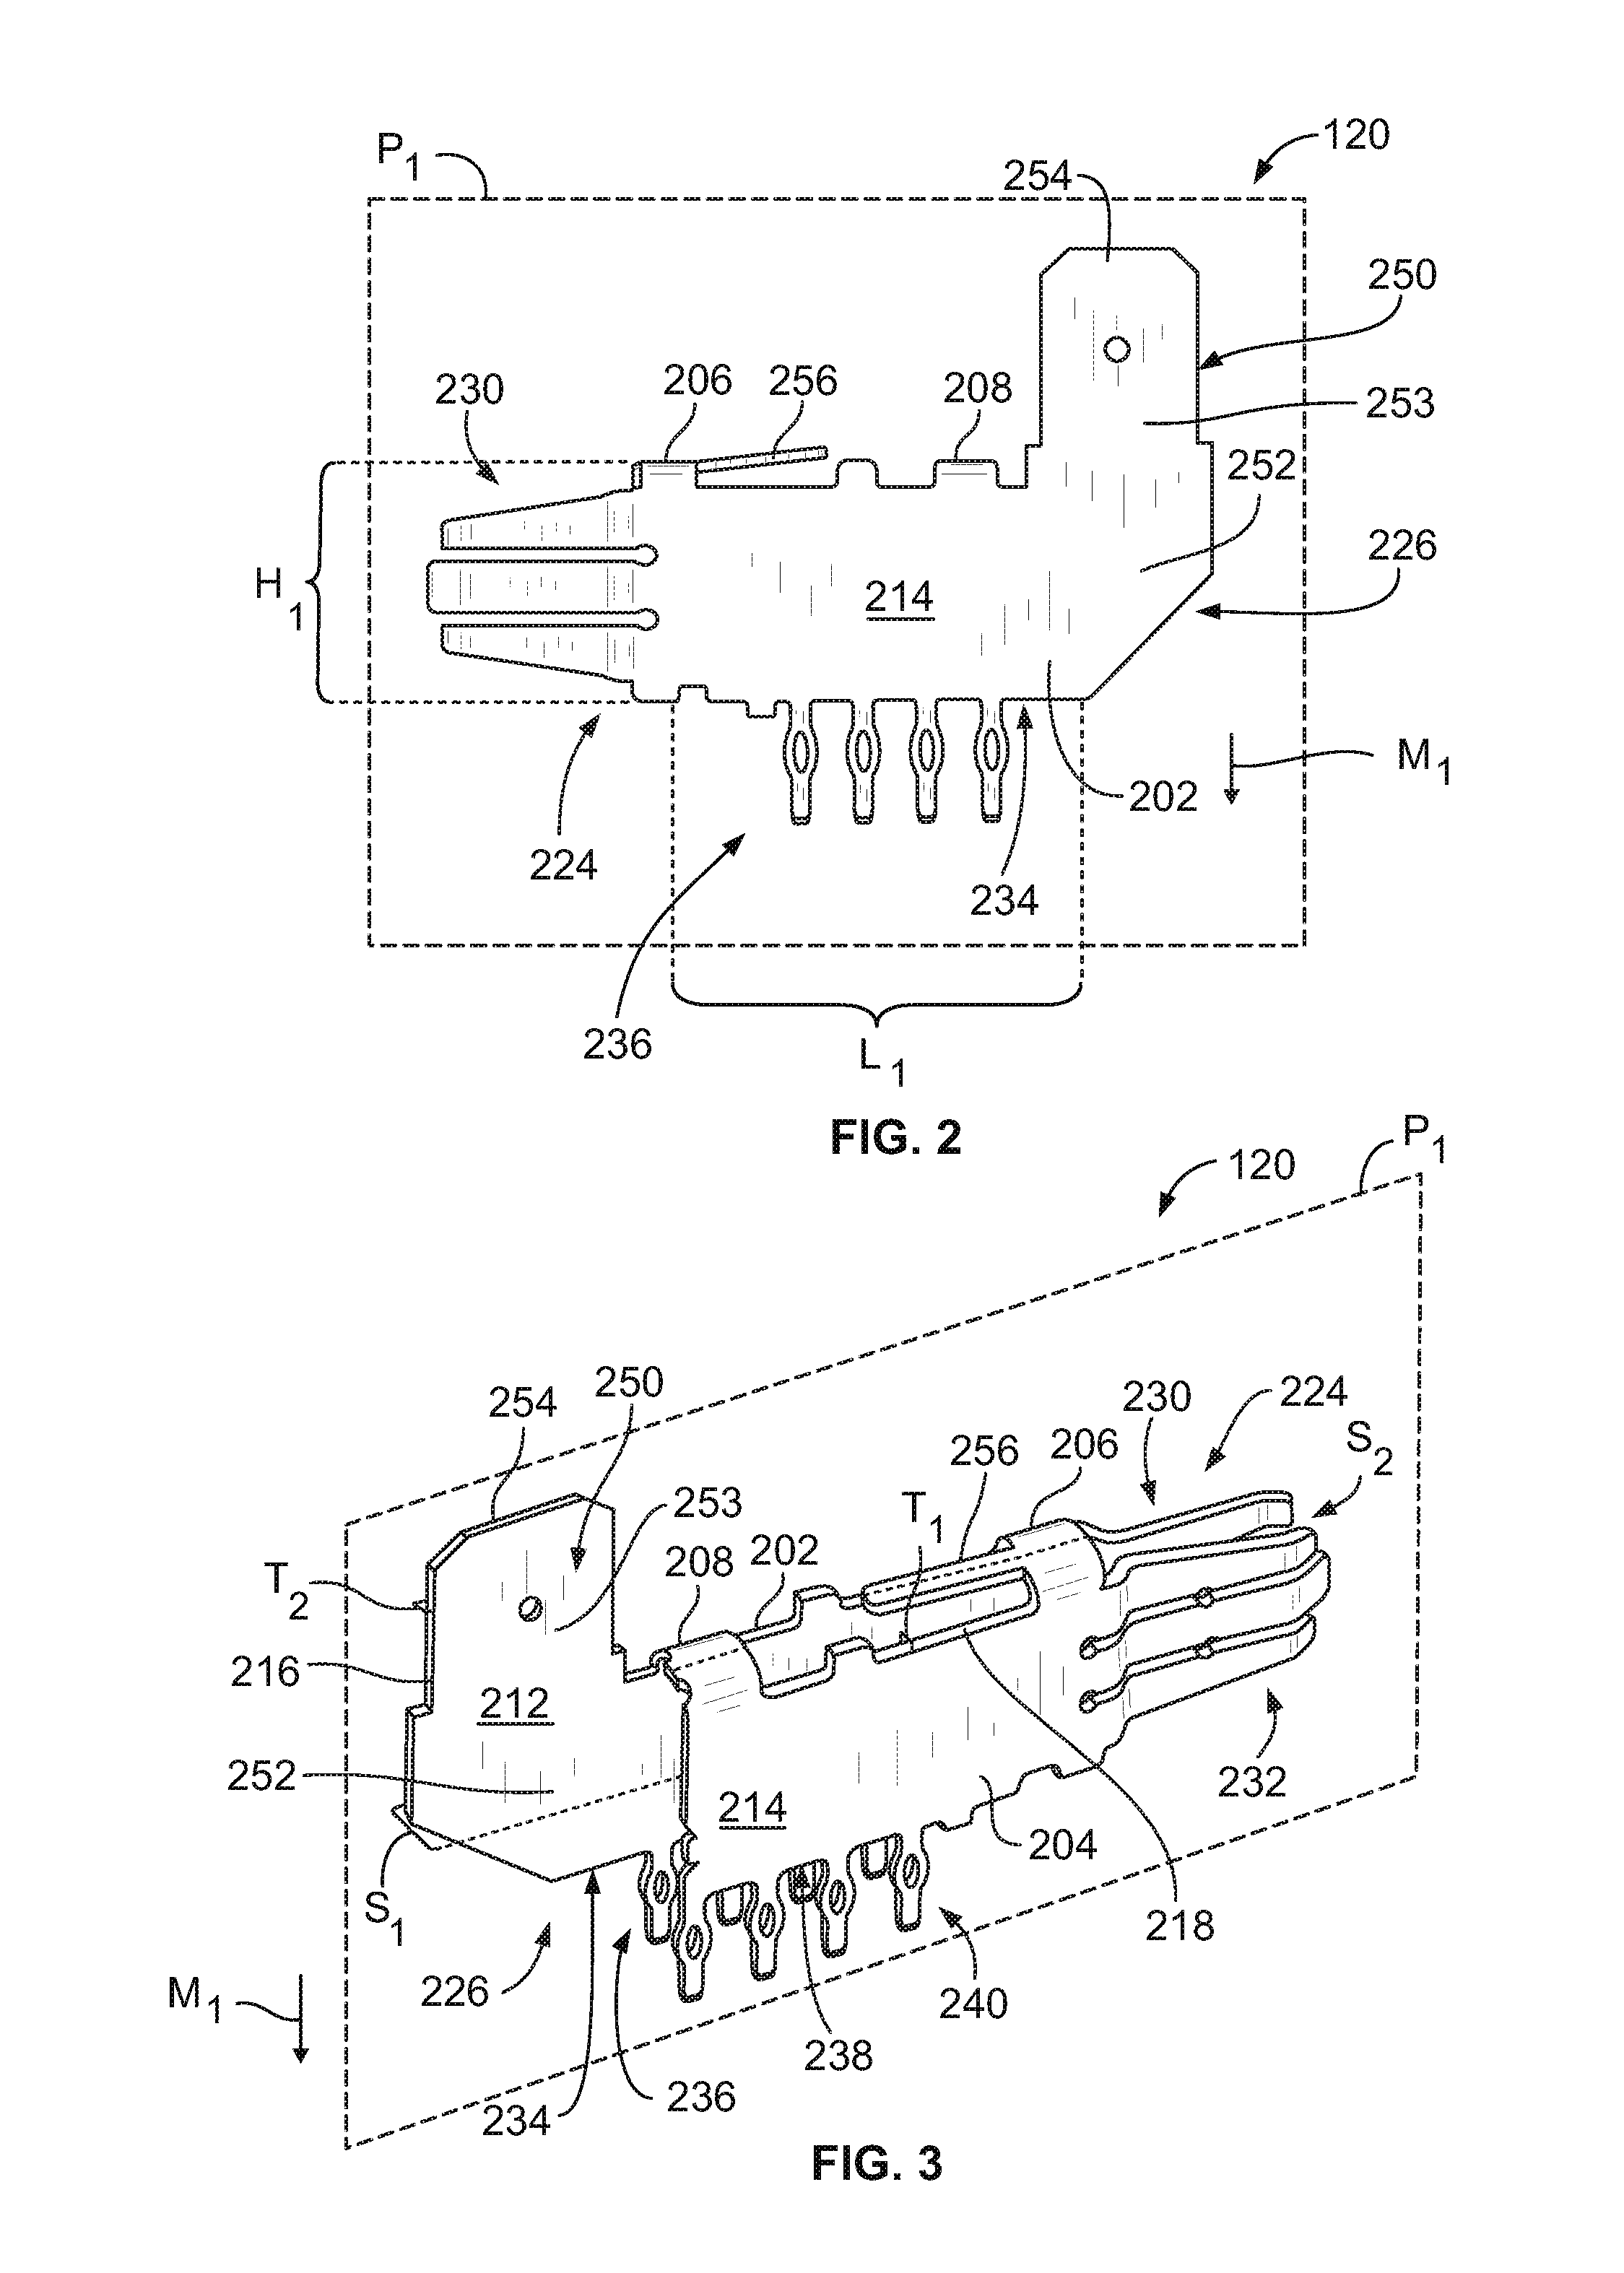 Power connector having a contact configured to transmit electrical power to separate components